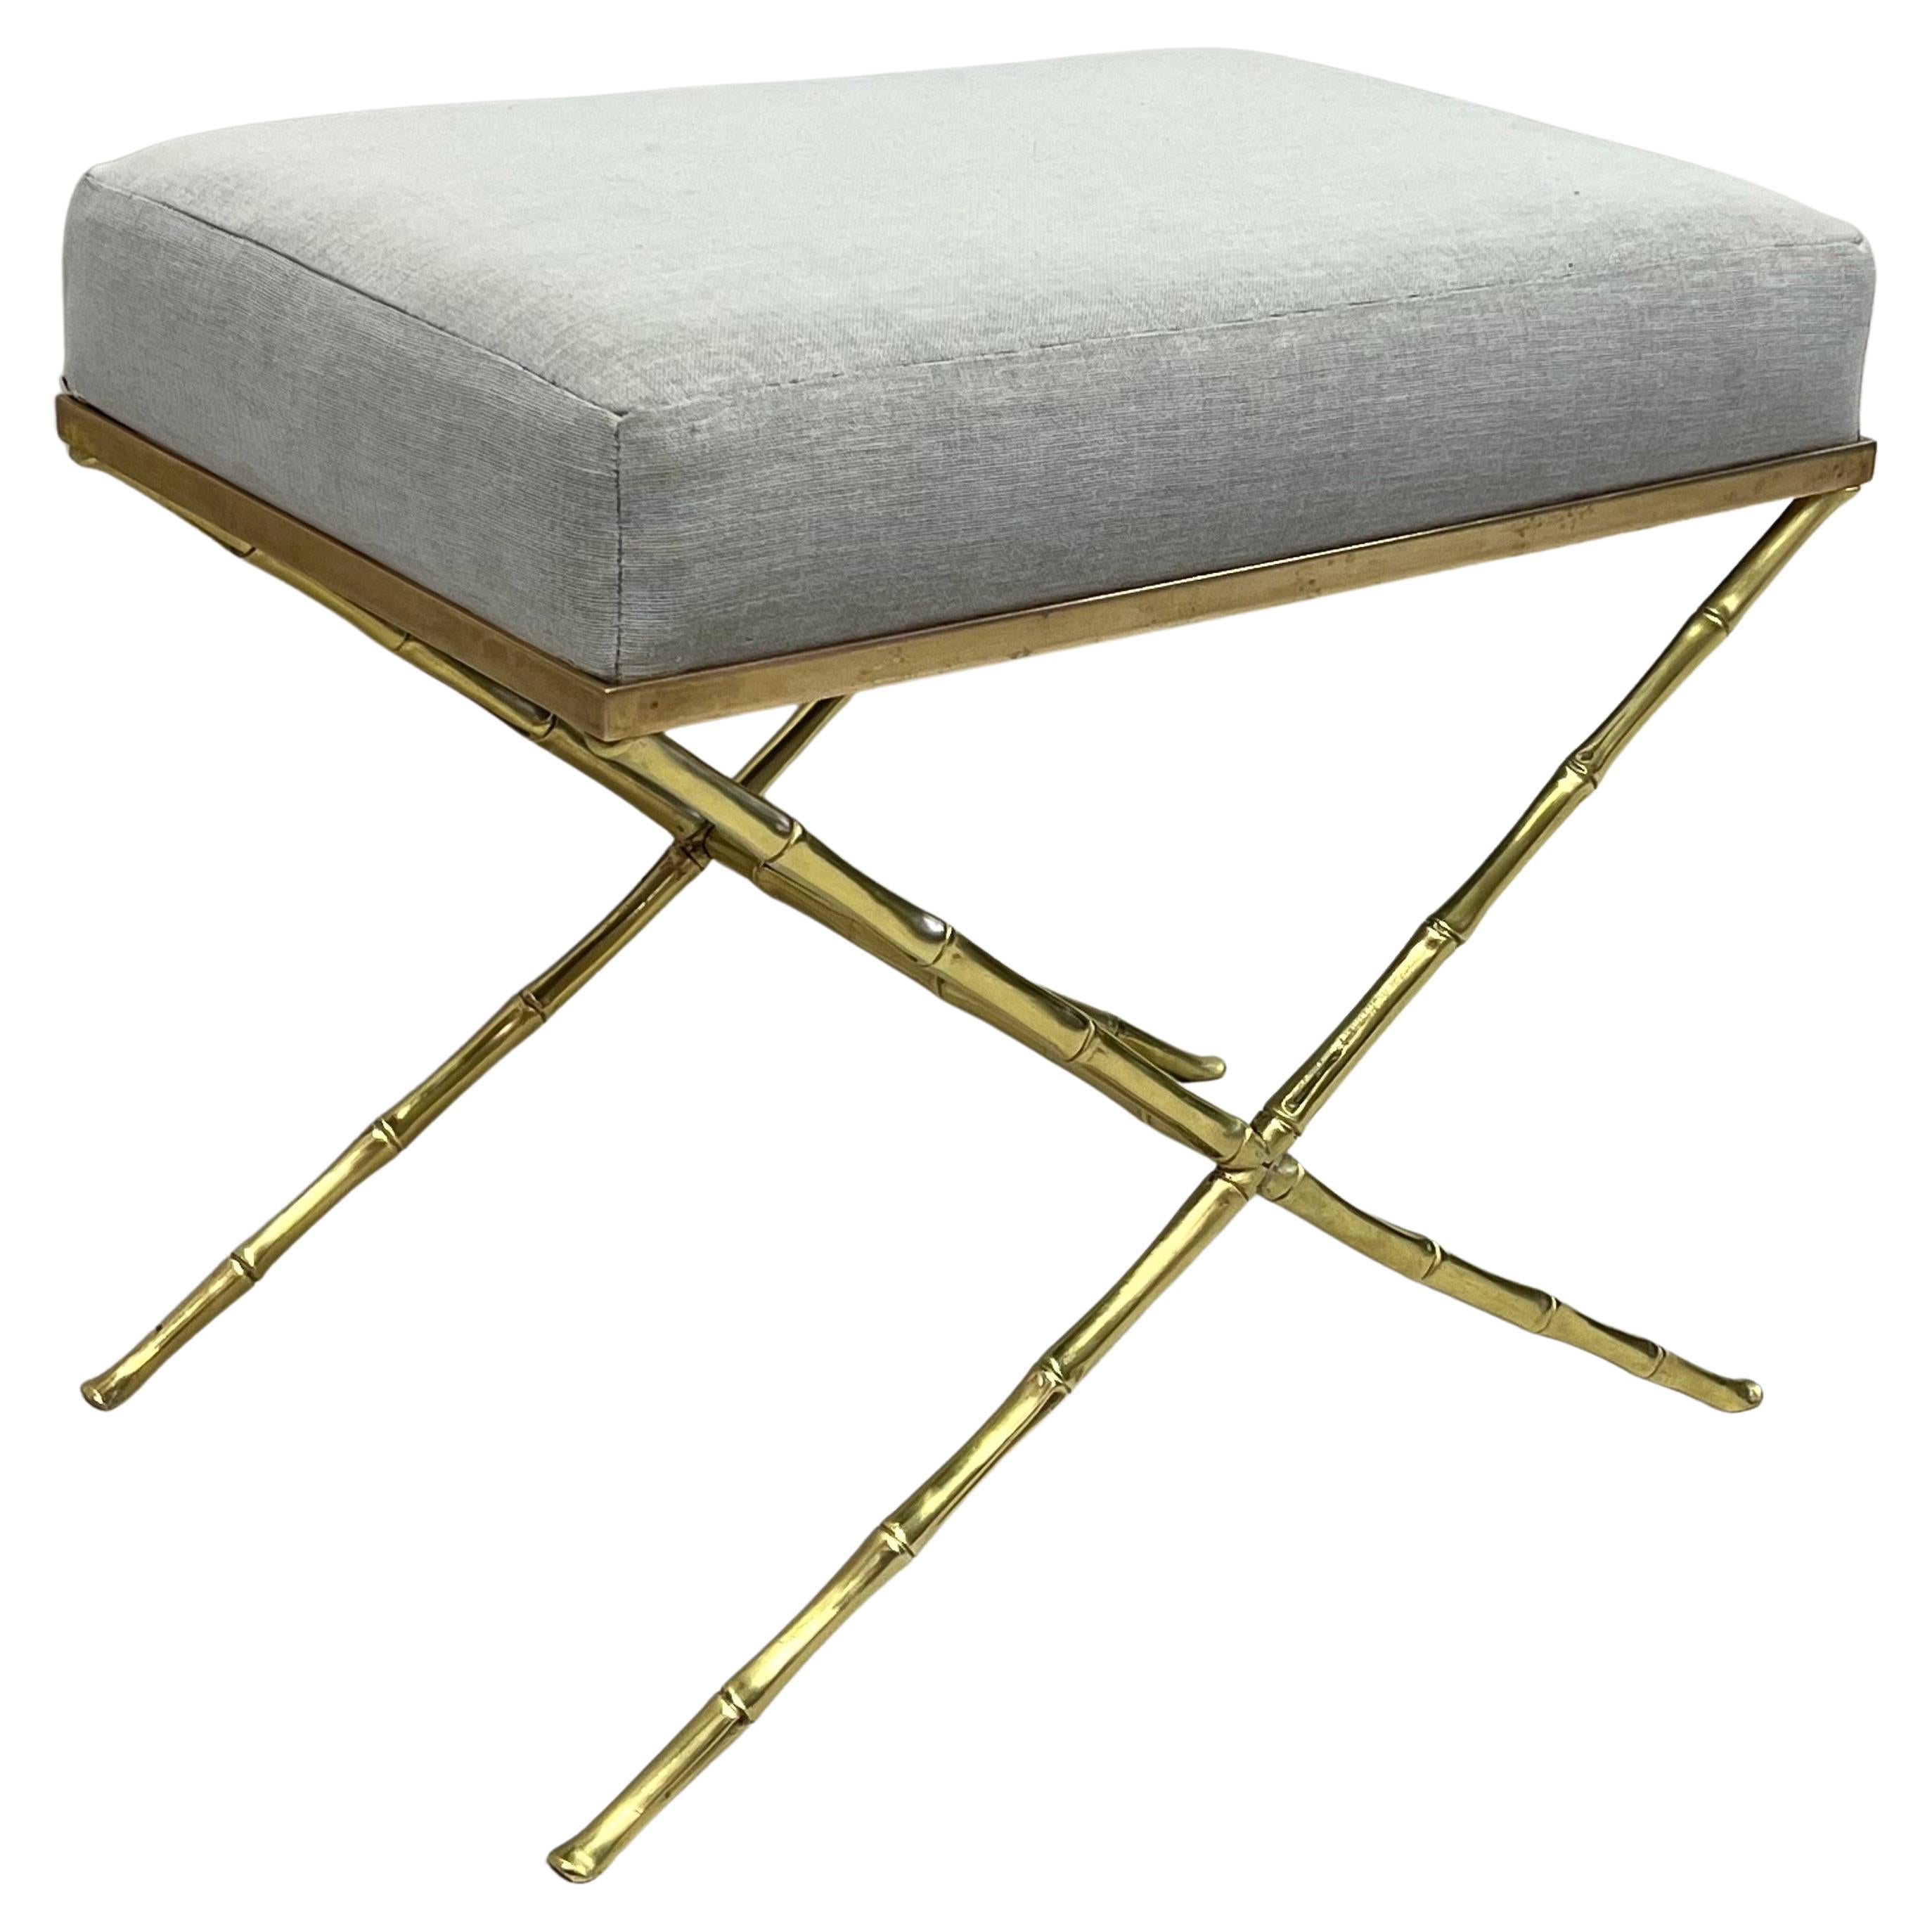 French Mid-Century Modern Neoclassical Brass Faux Bamboo Bench by Maison Baguès